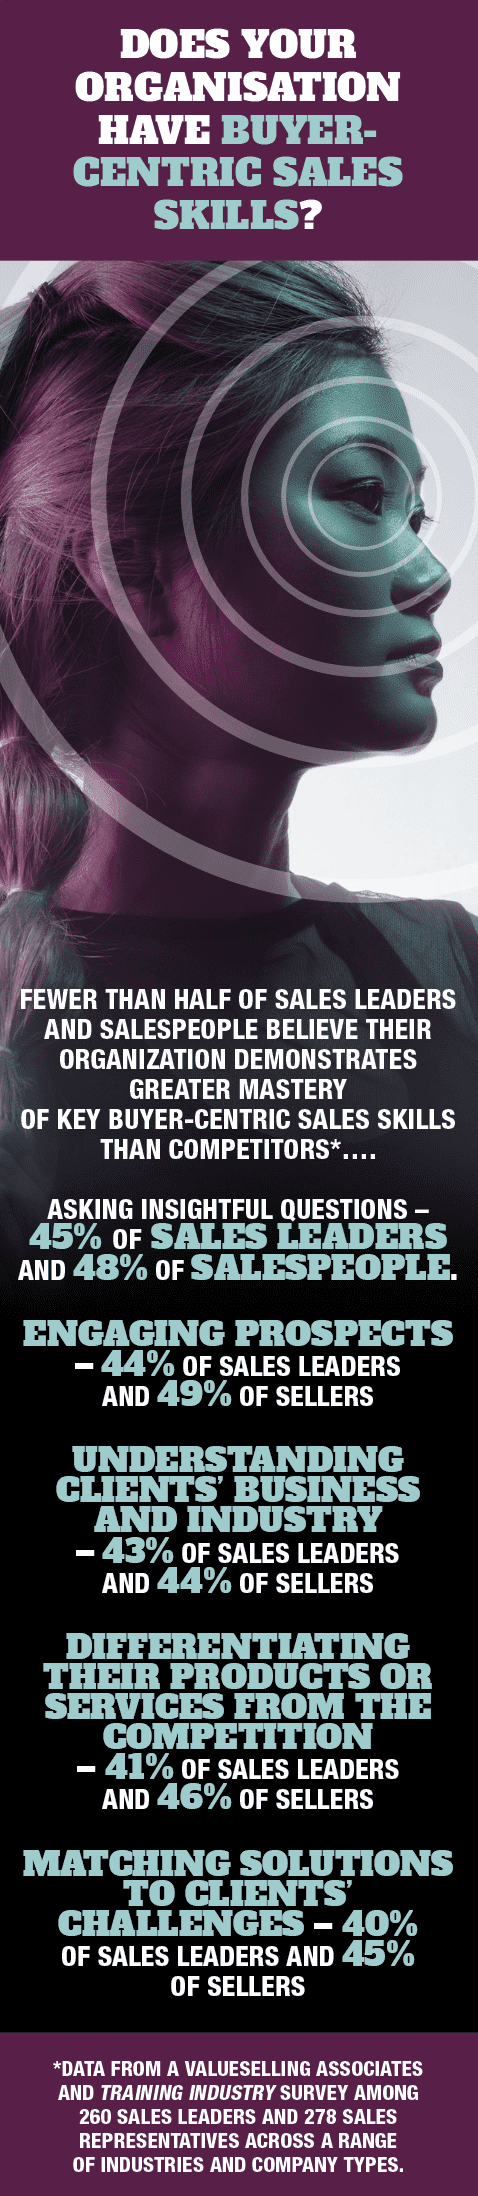 Does your organisation have buyer-centric sales skills?